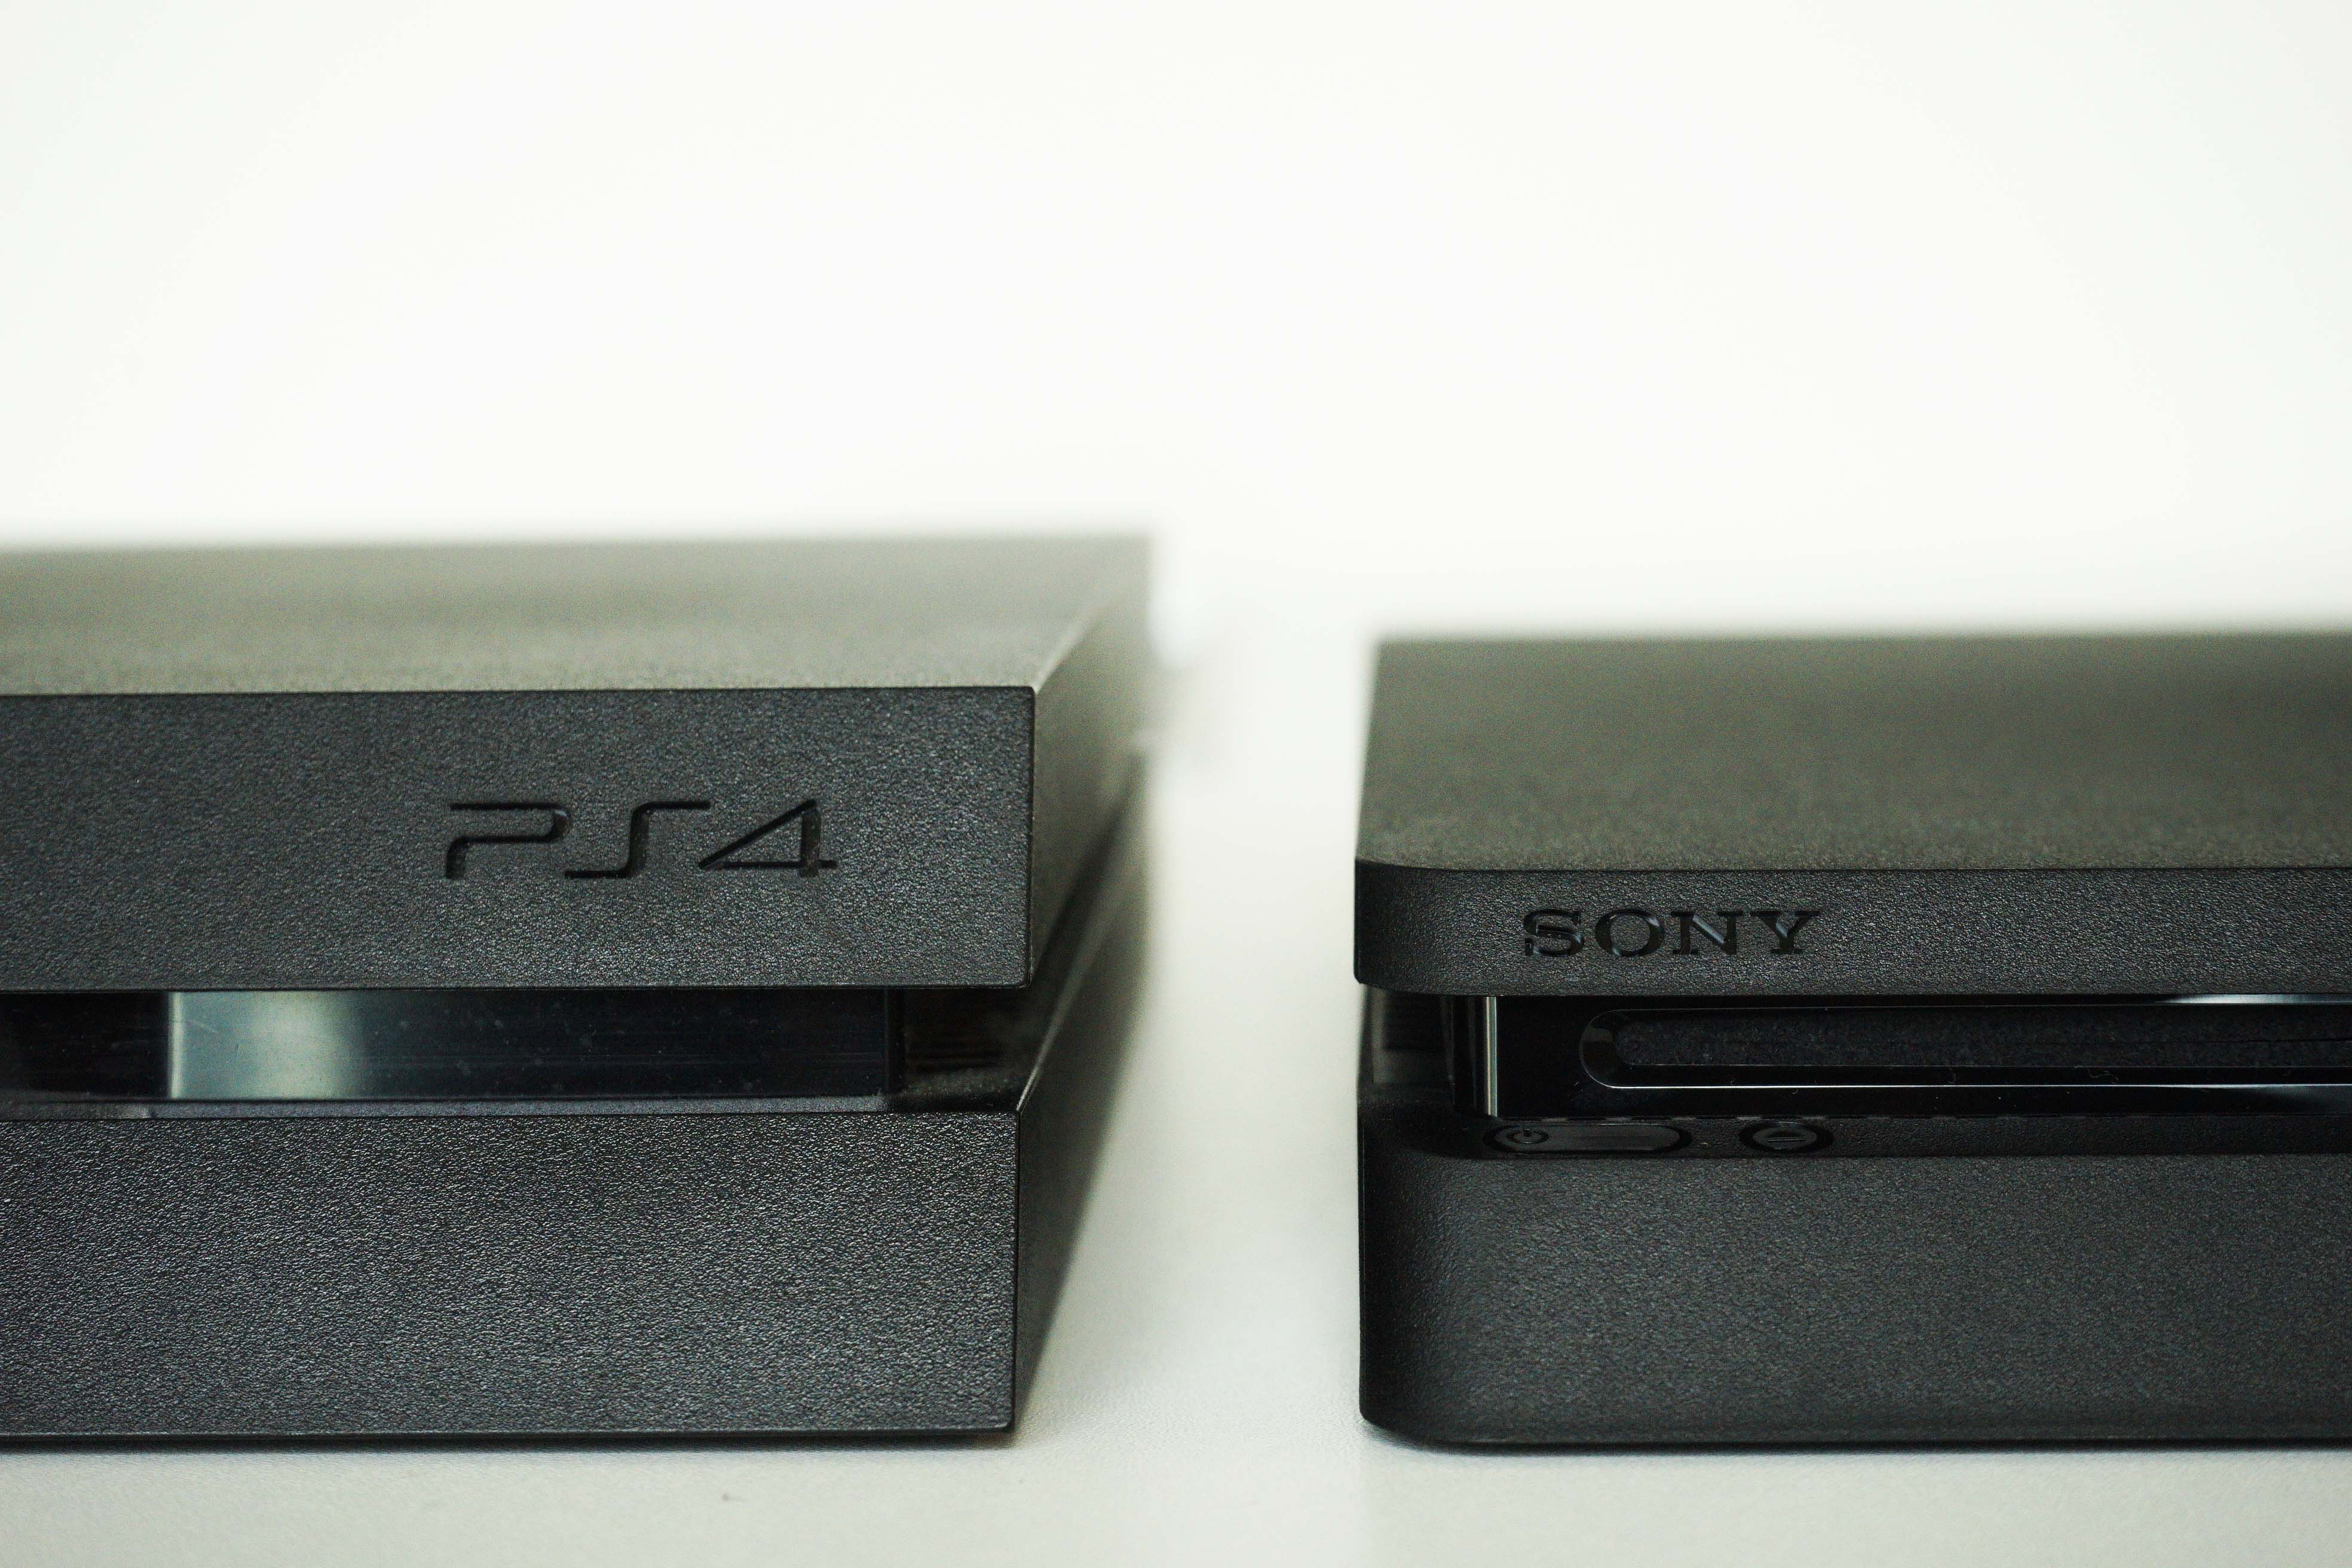 In Photos How The Ps4 Slim Compares To The The Original Ps4